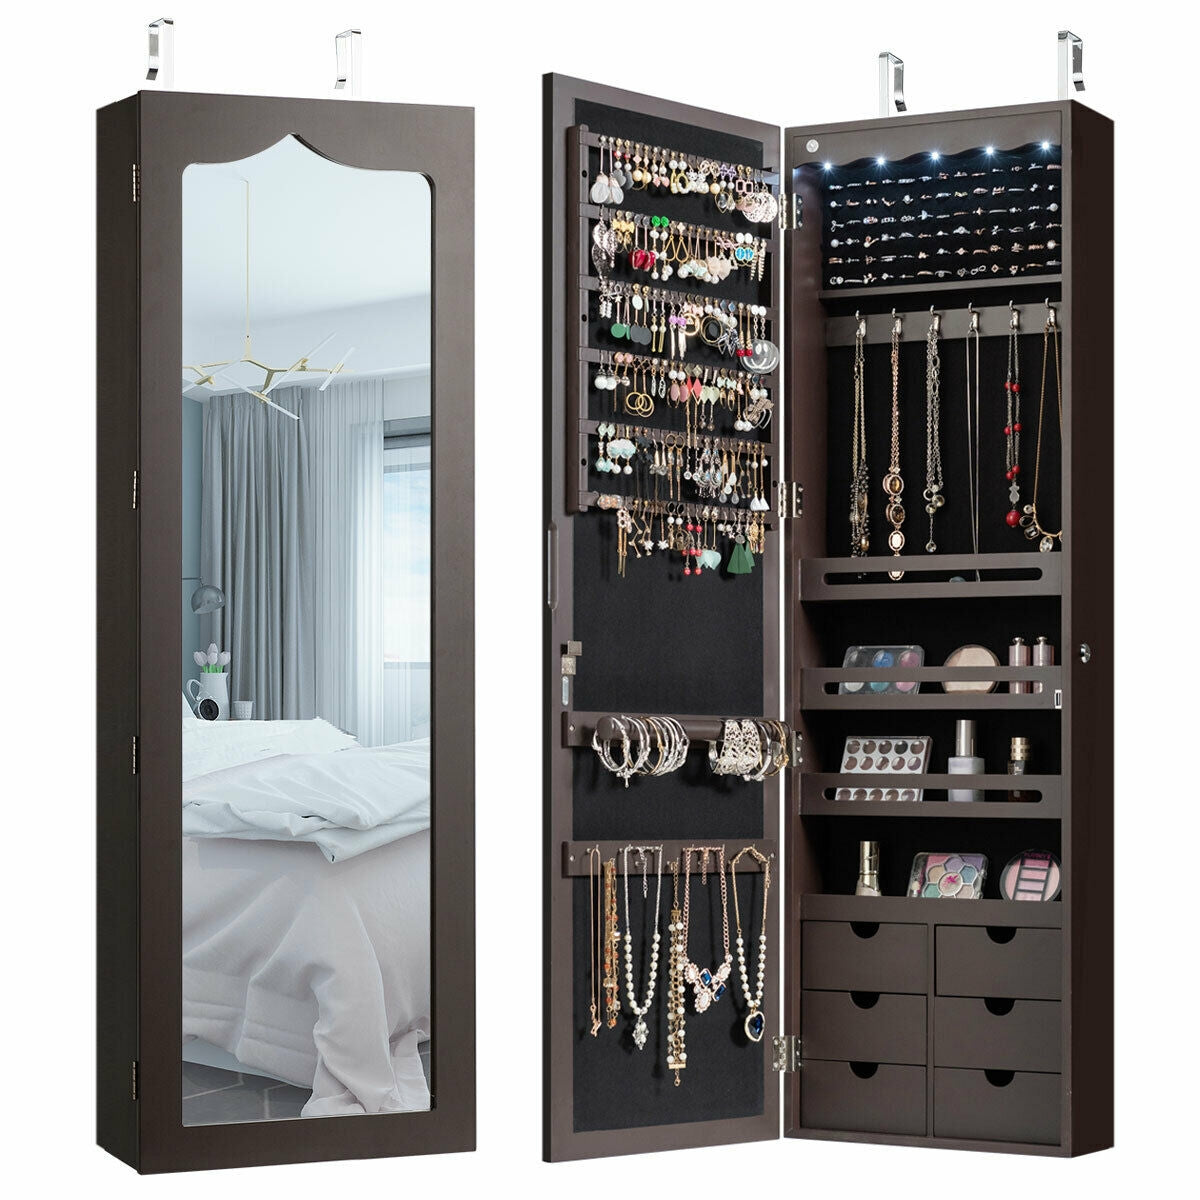 5 LEDs Lockable Mirror Jewelry Cabinet Armoire with 6 Drawers-Coffee